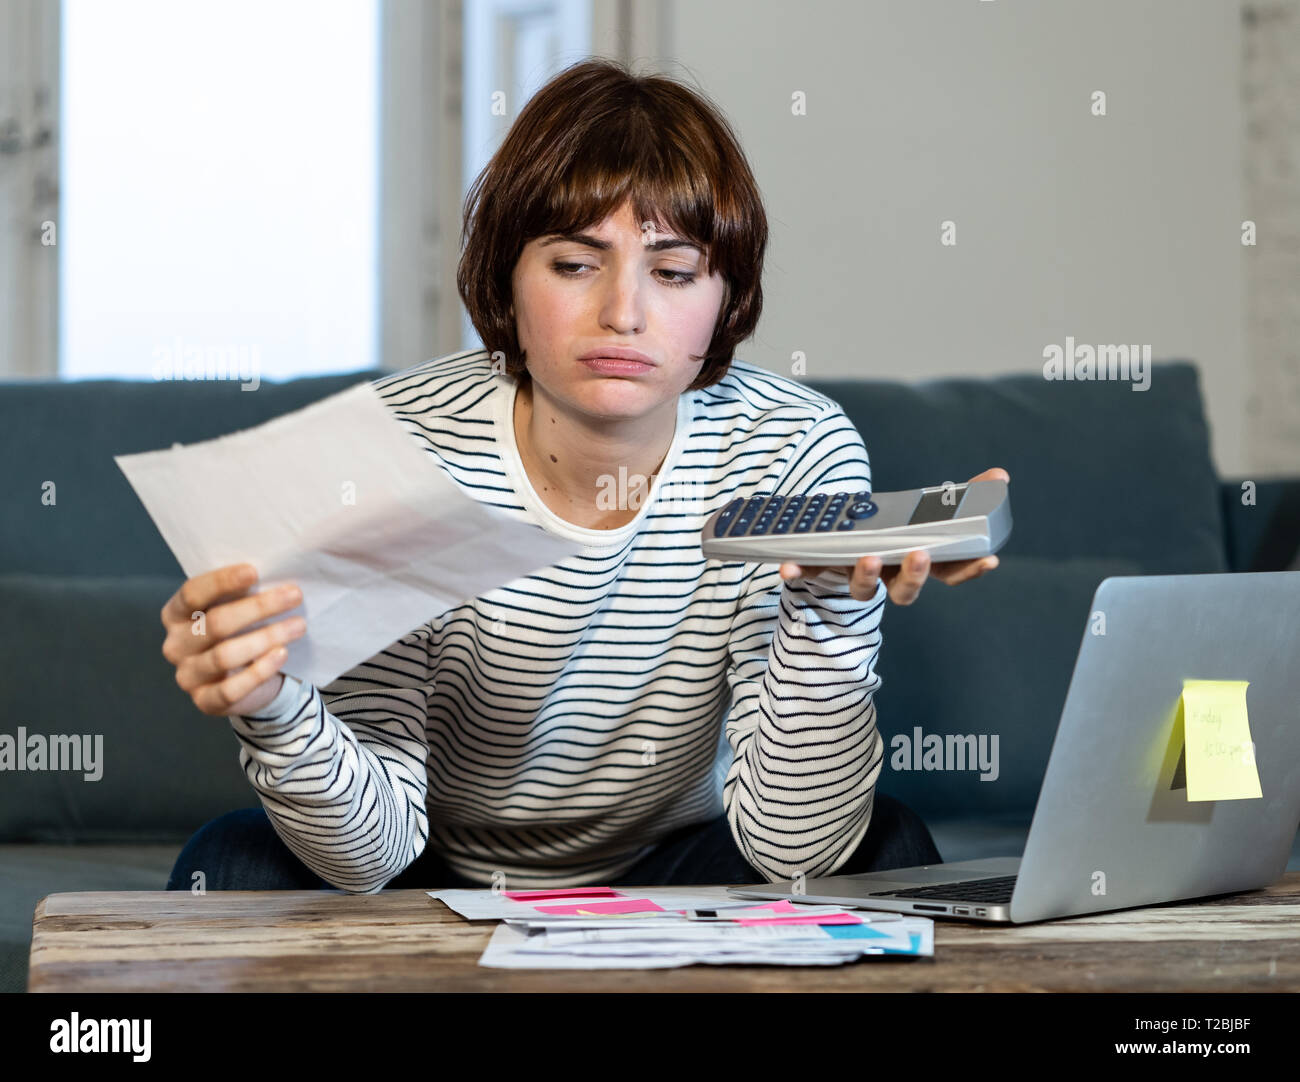 Page 8 - Banking Loan High Resolution Stock Photography and Images - Alamy